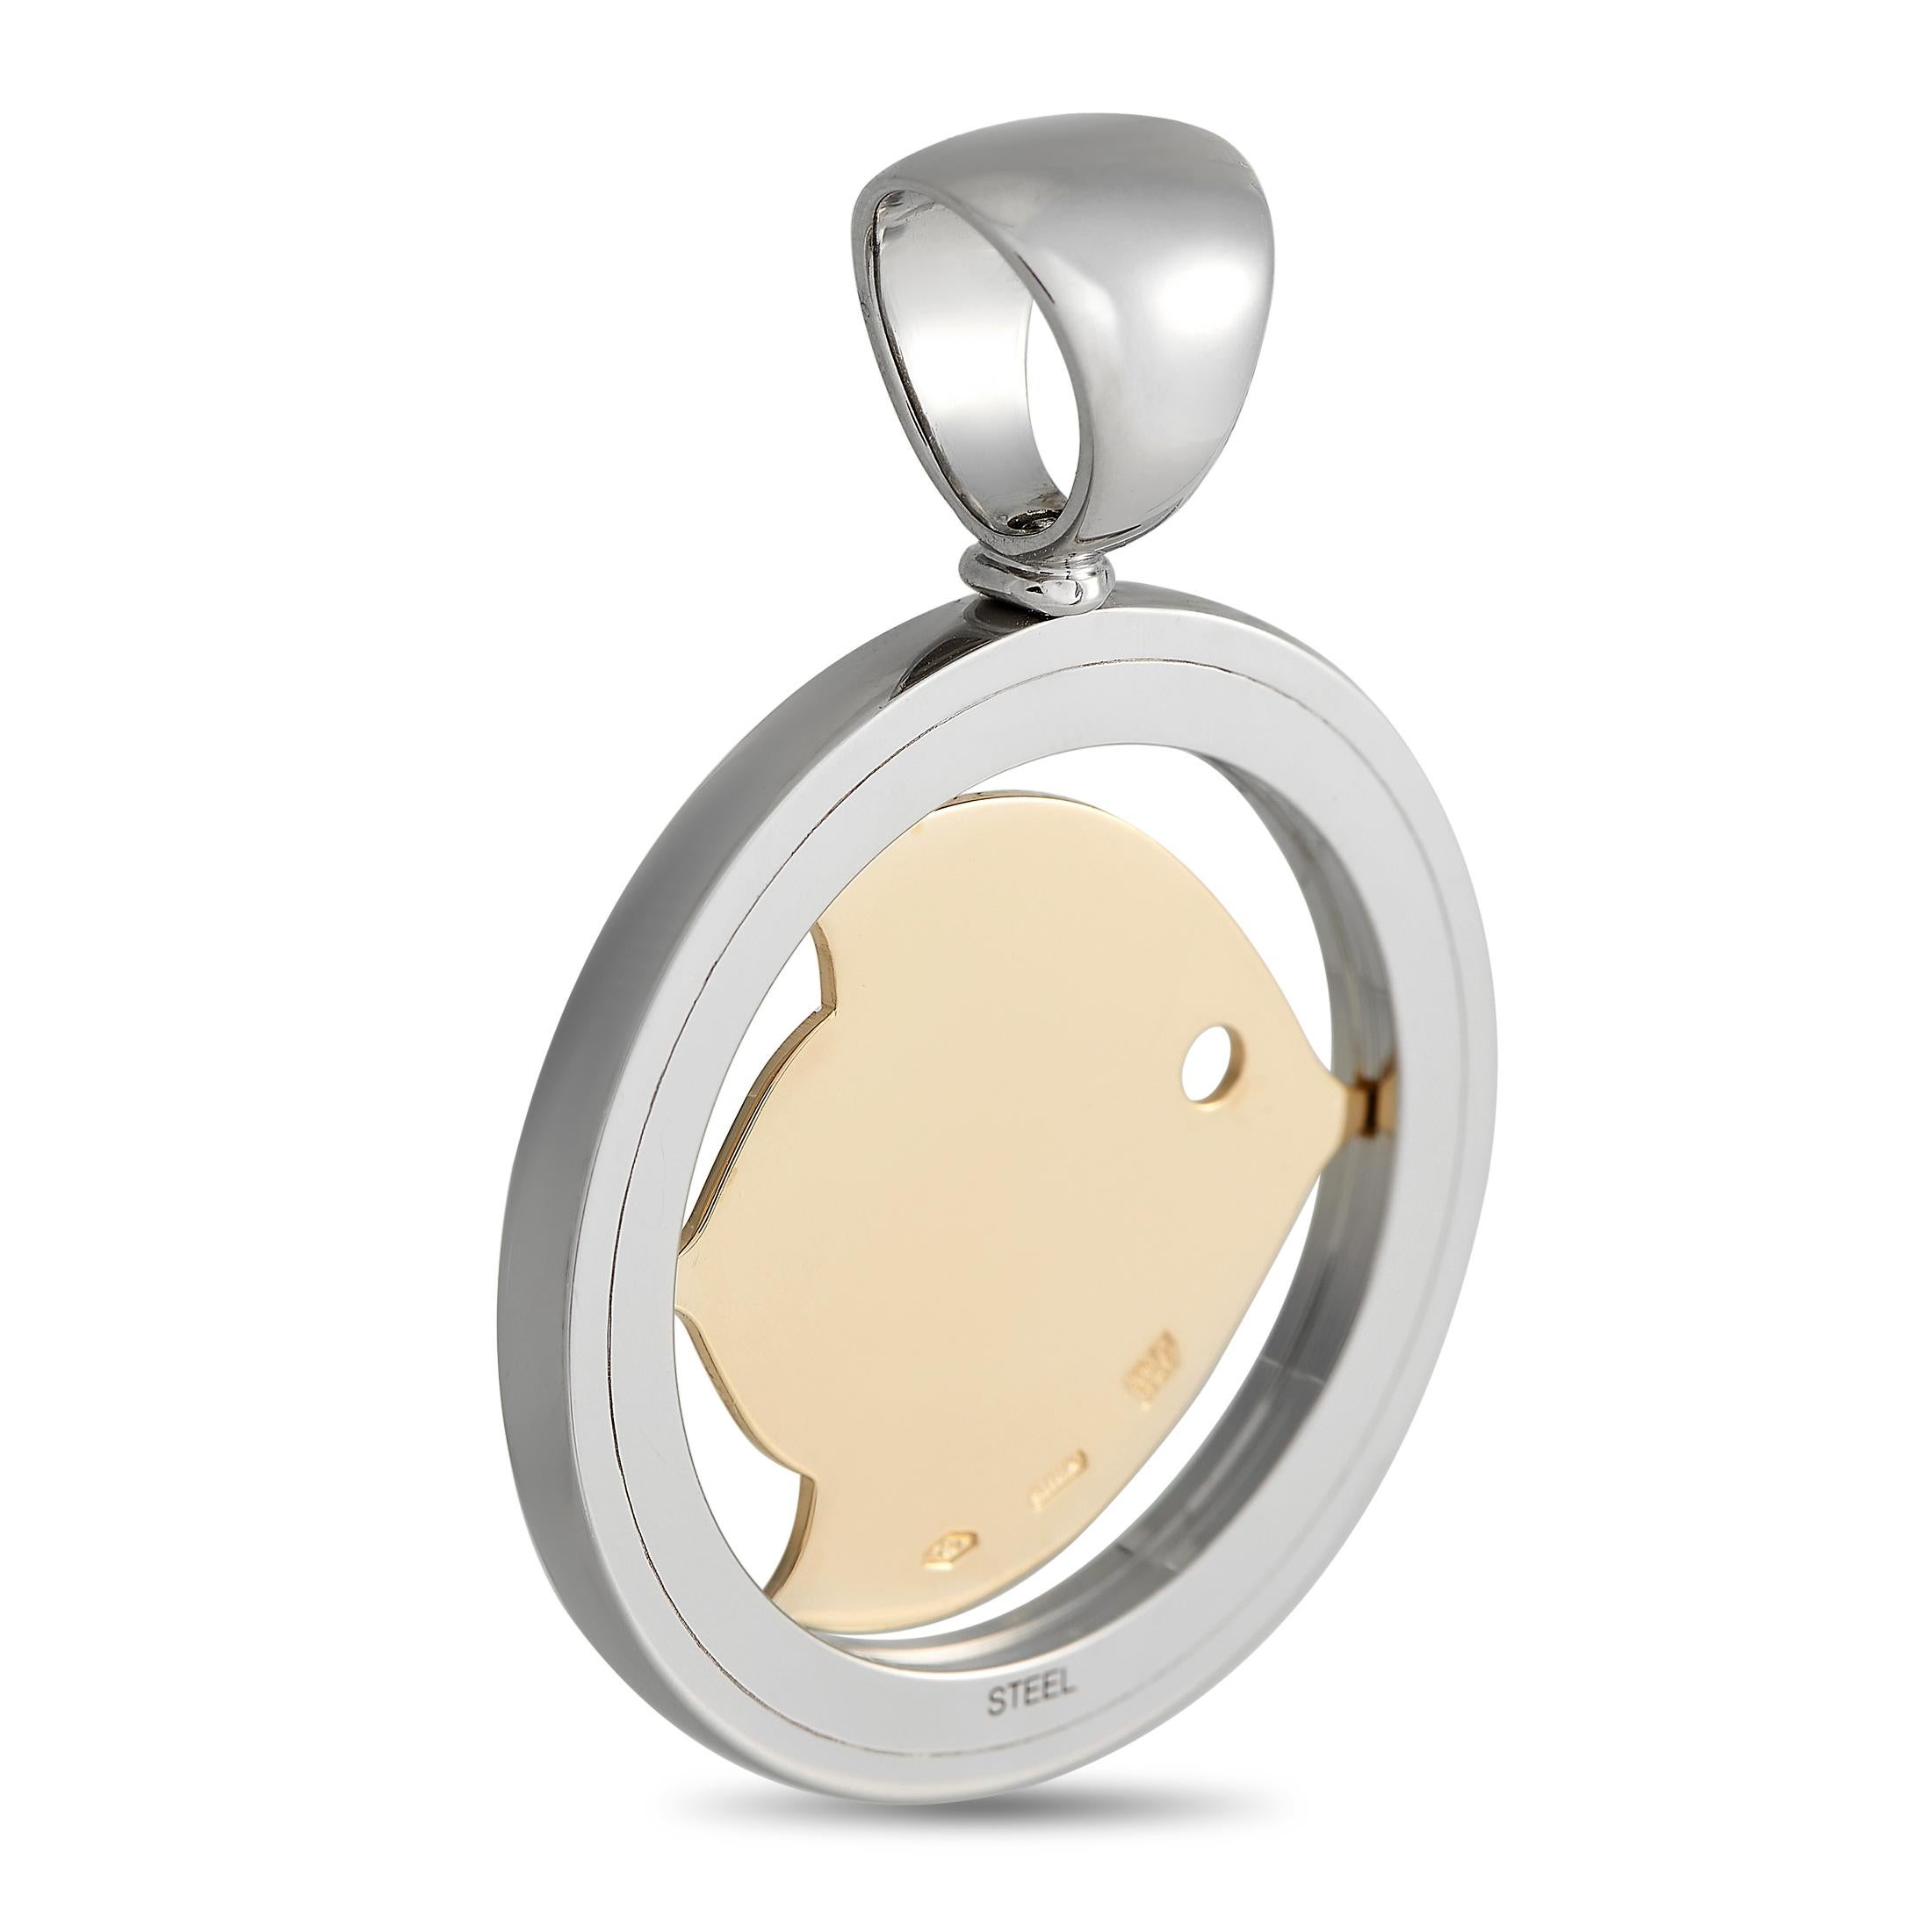 From Bvlgari's Tondo collection, here is a circular pendant in polished stainless steel set with an 18K yellow gold fish motif. The Bvlgari text logo is engraved on the bottom portion of the circular steel frame.This Bvlgari Tondo 18K Yellow Gold